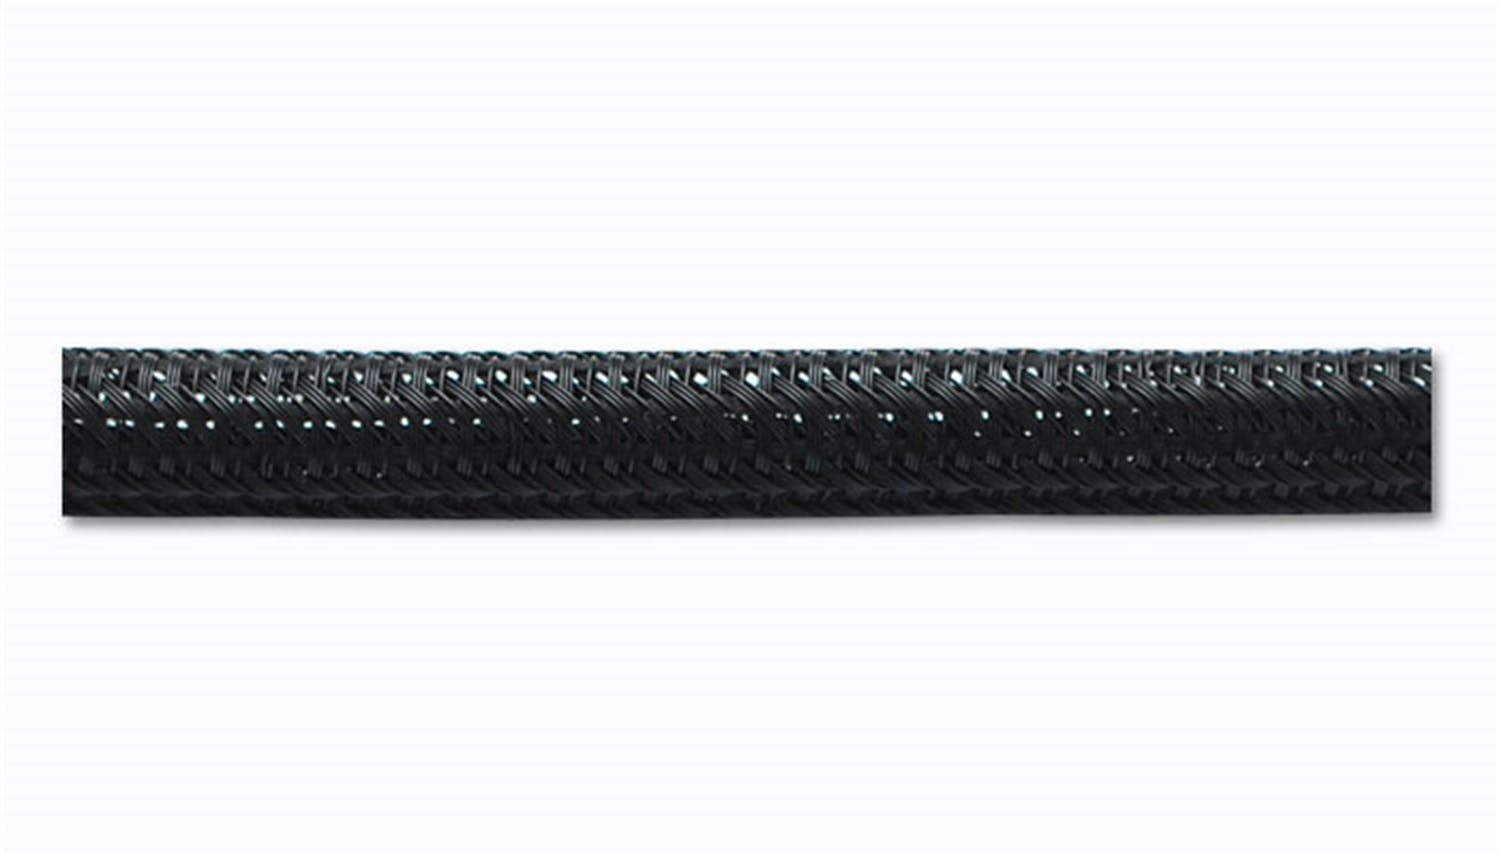 Vibrant Performance 25801 Flexible Split Sleeving, Size: 1/2 inch (10 foot legnth) - Black only